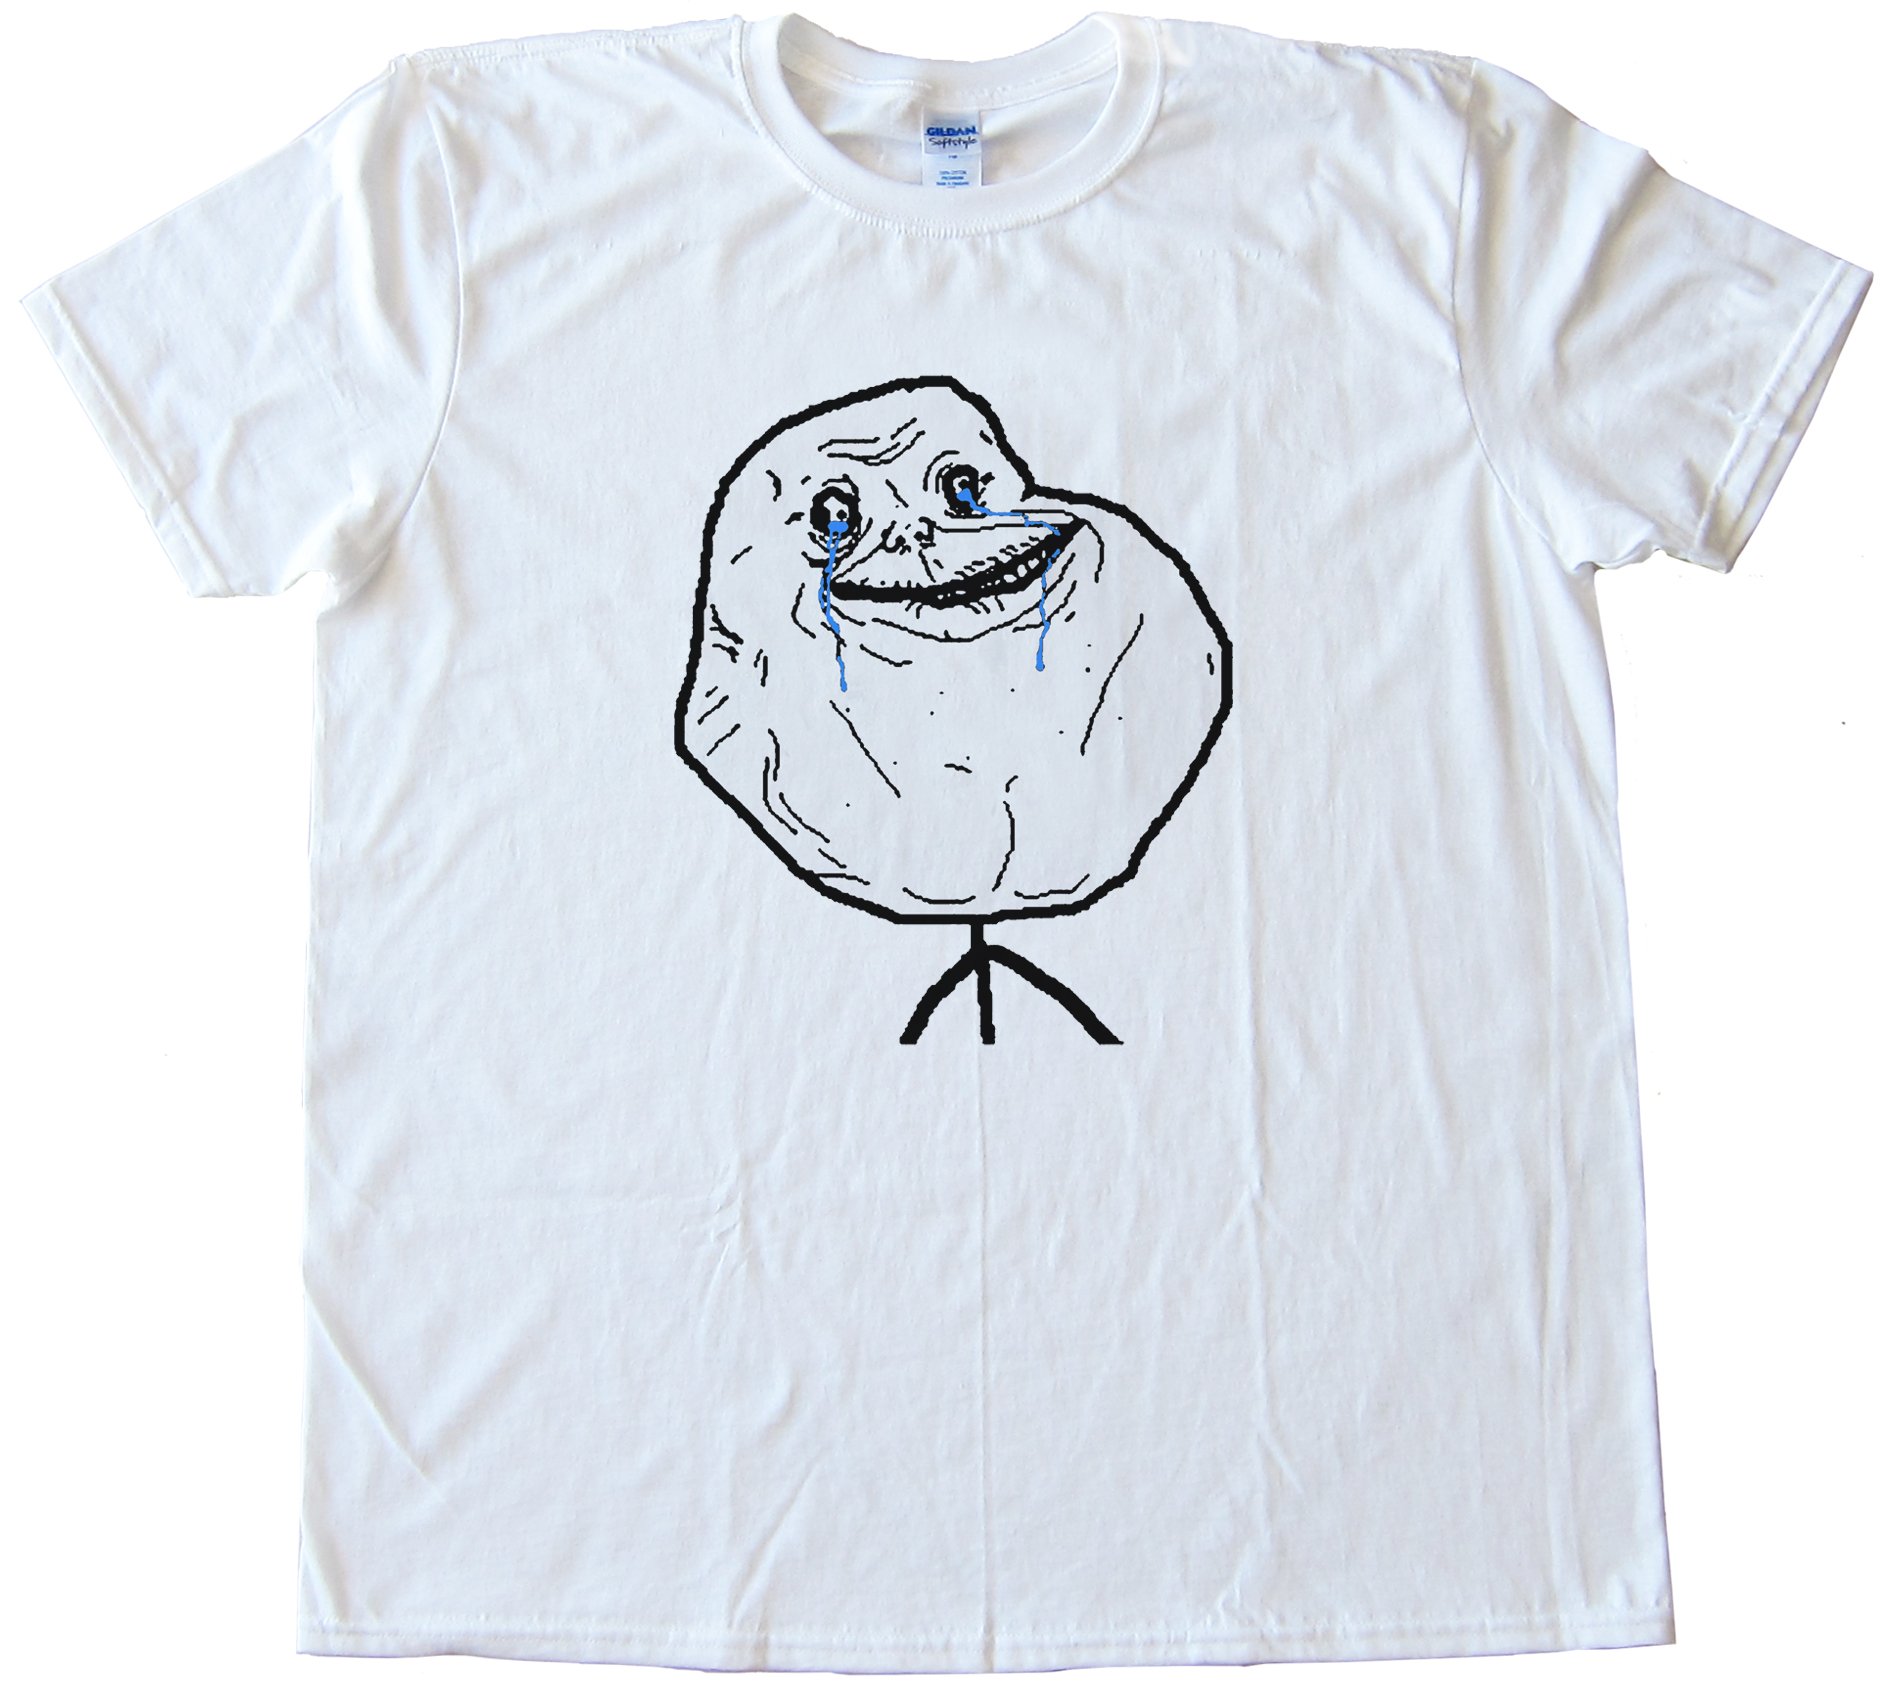 Forever Alone Tee Shirt